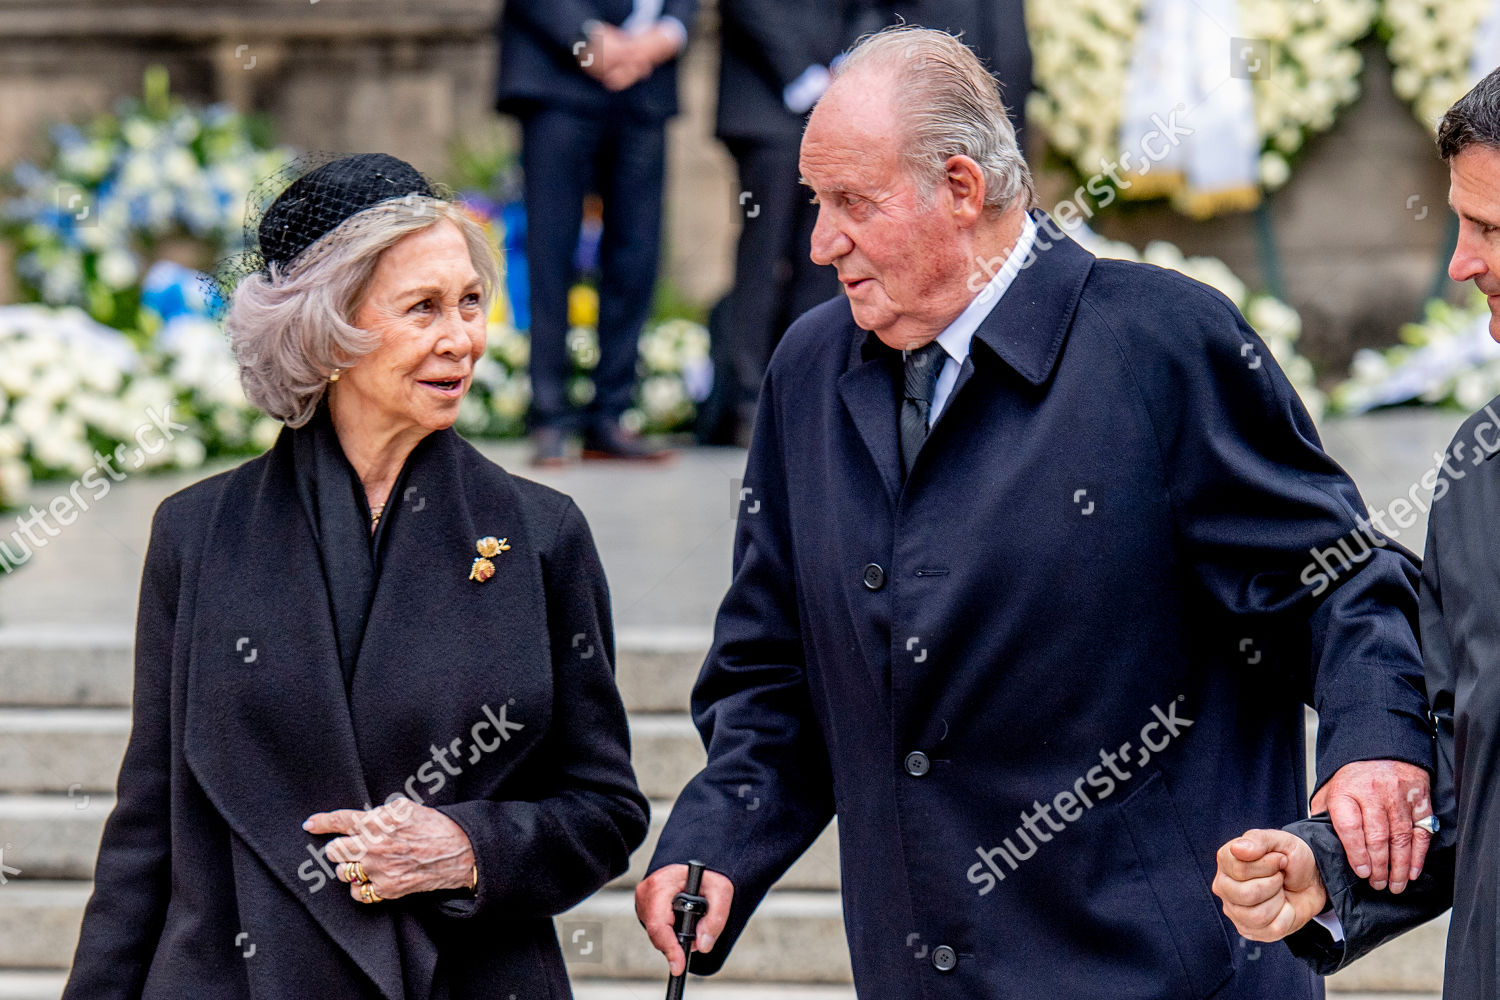 grand-duke-jean-funeral-cathedral-notre-dame-luxembourg-shutterstock-editorial-10228100ff.jpg